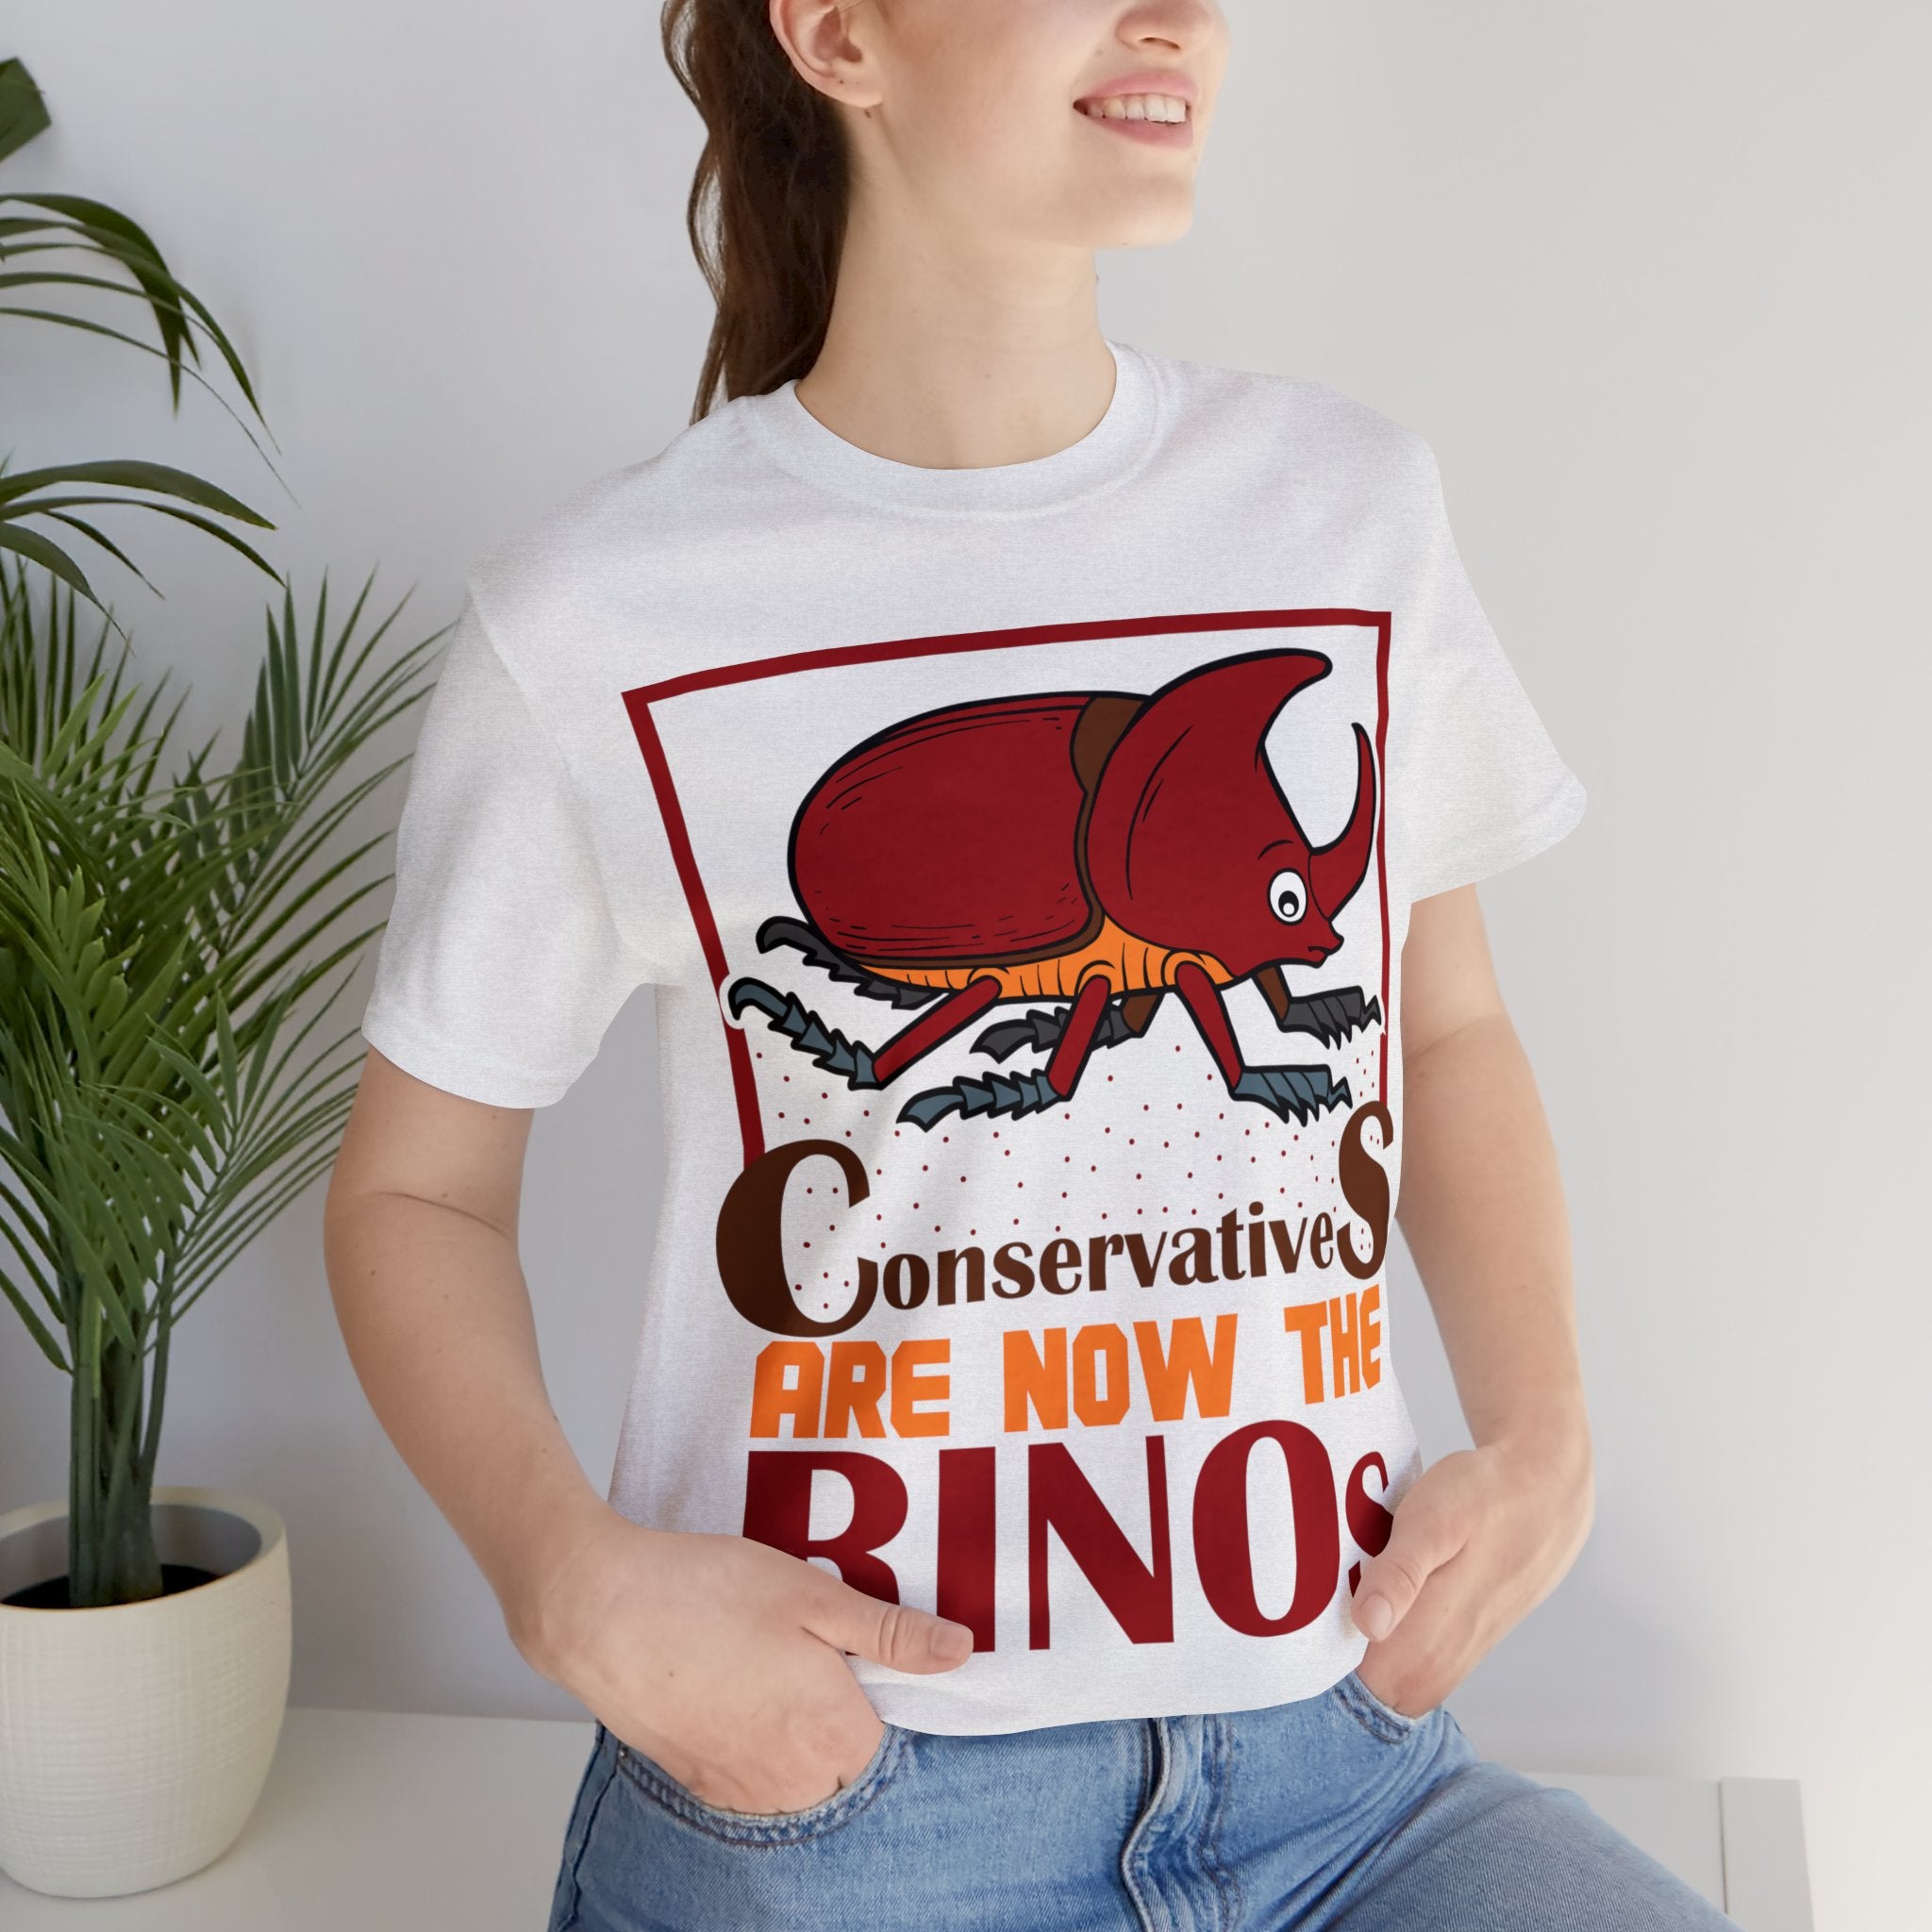 Conservatives are Now the RINOs